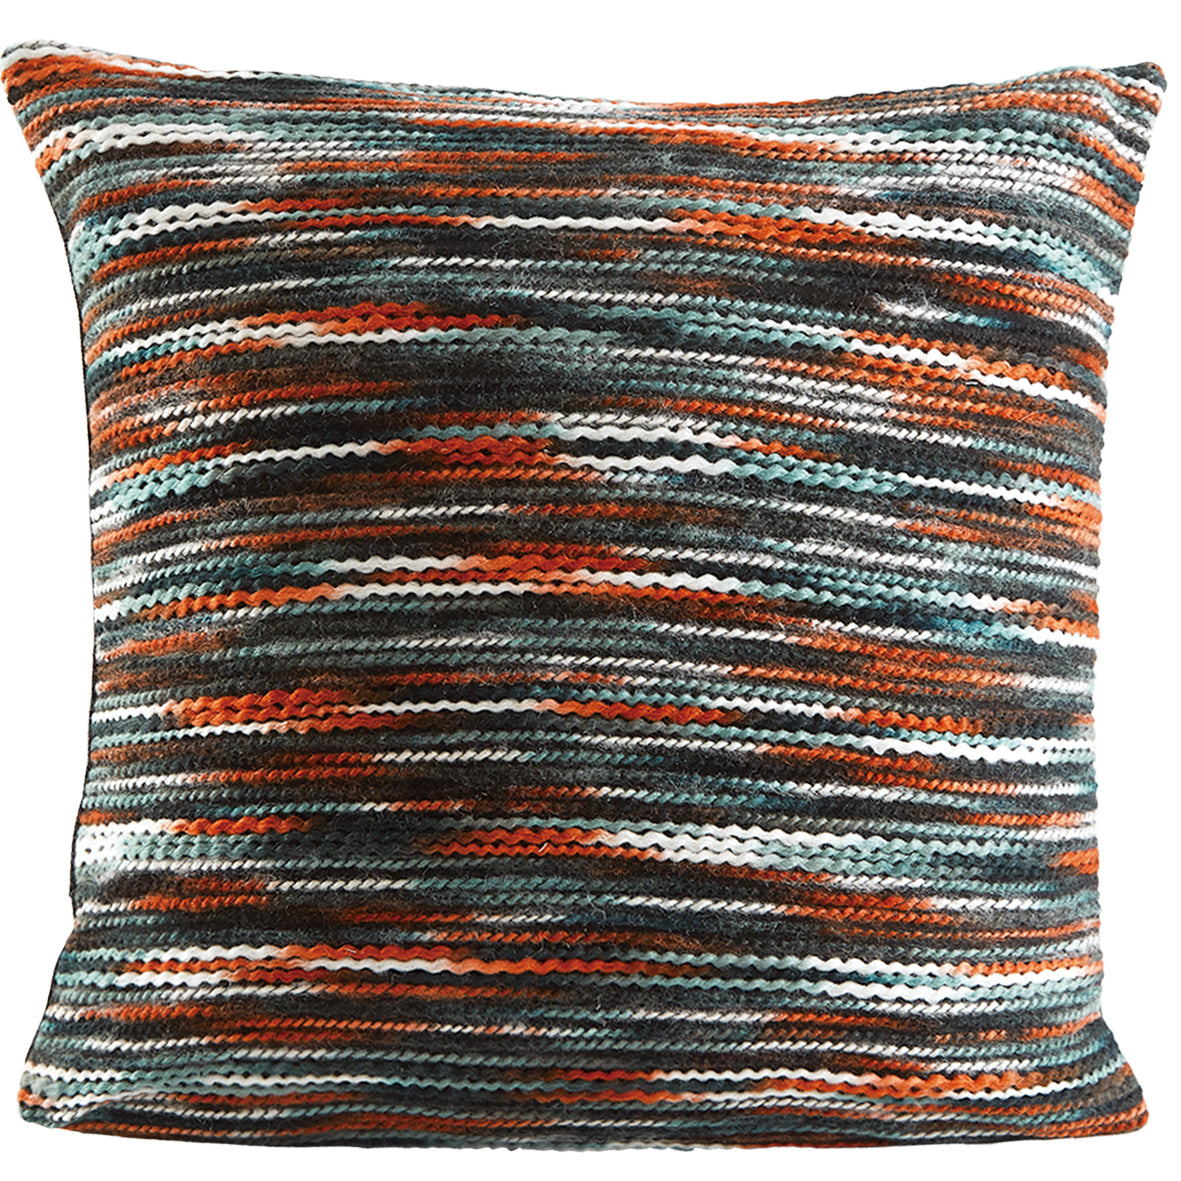 Chenille Accentuation Exotic Stripes Pattern Decorative Accent Throw Pillow Cover